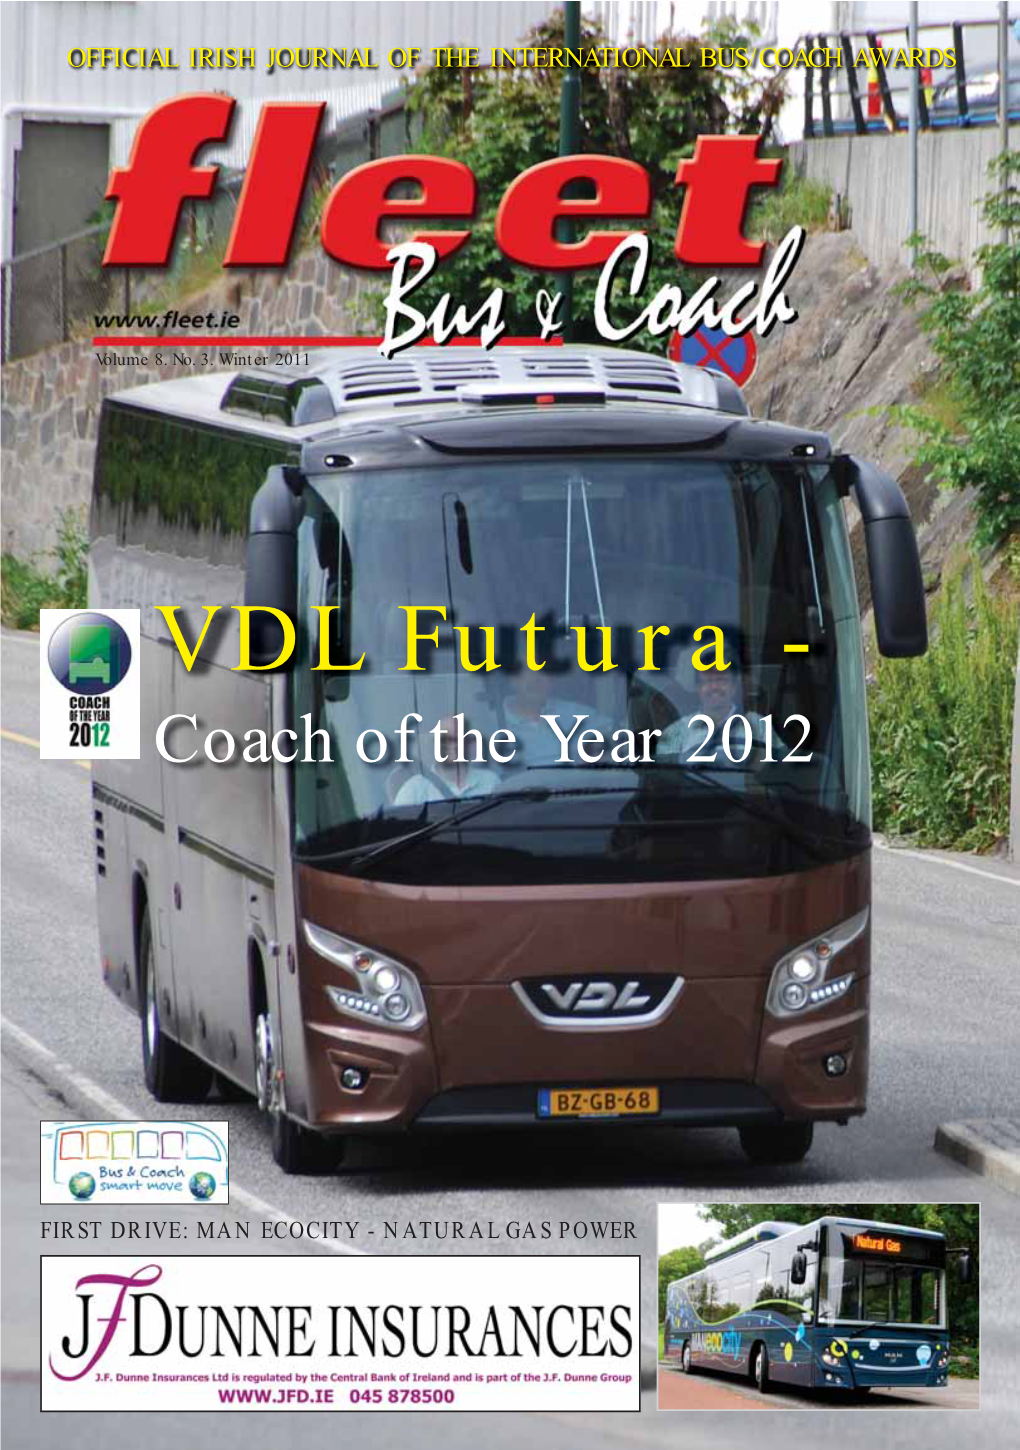 VDL Futura - Coach of the Year 2012